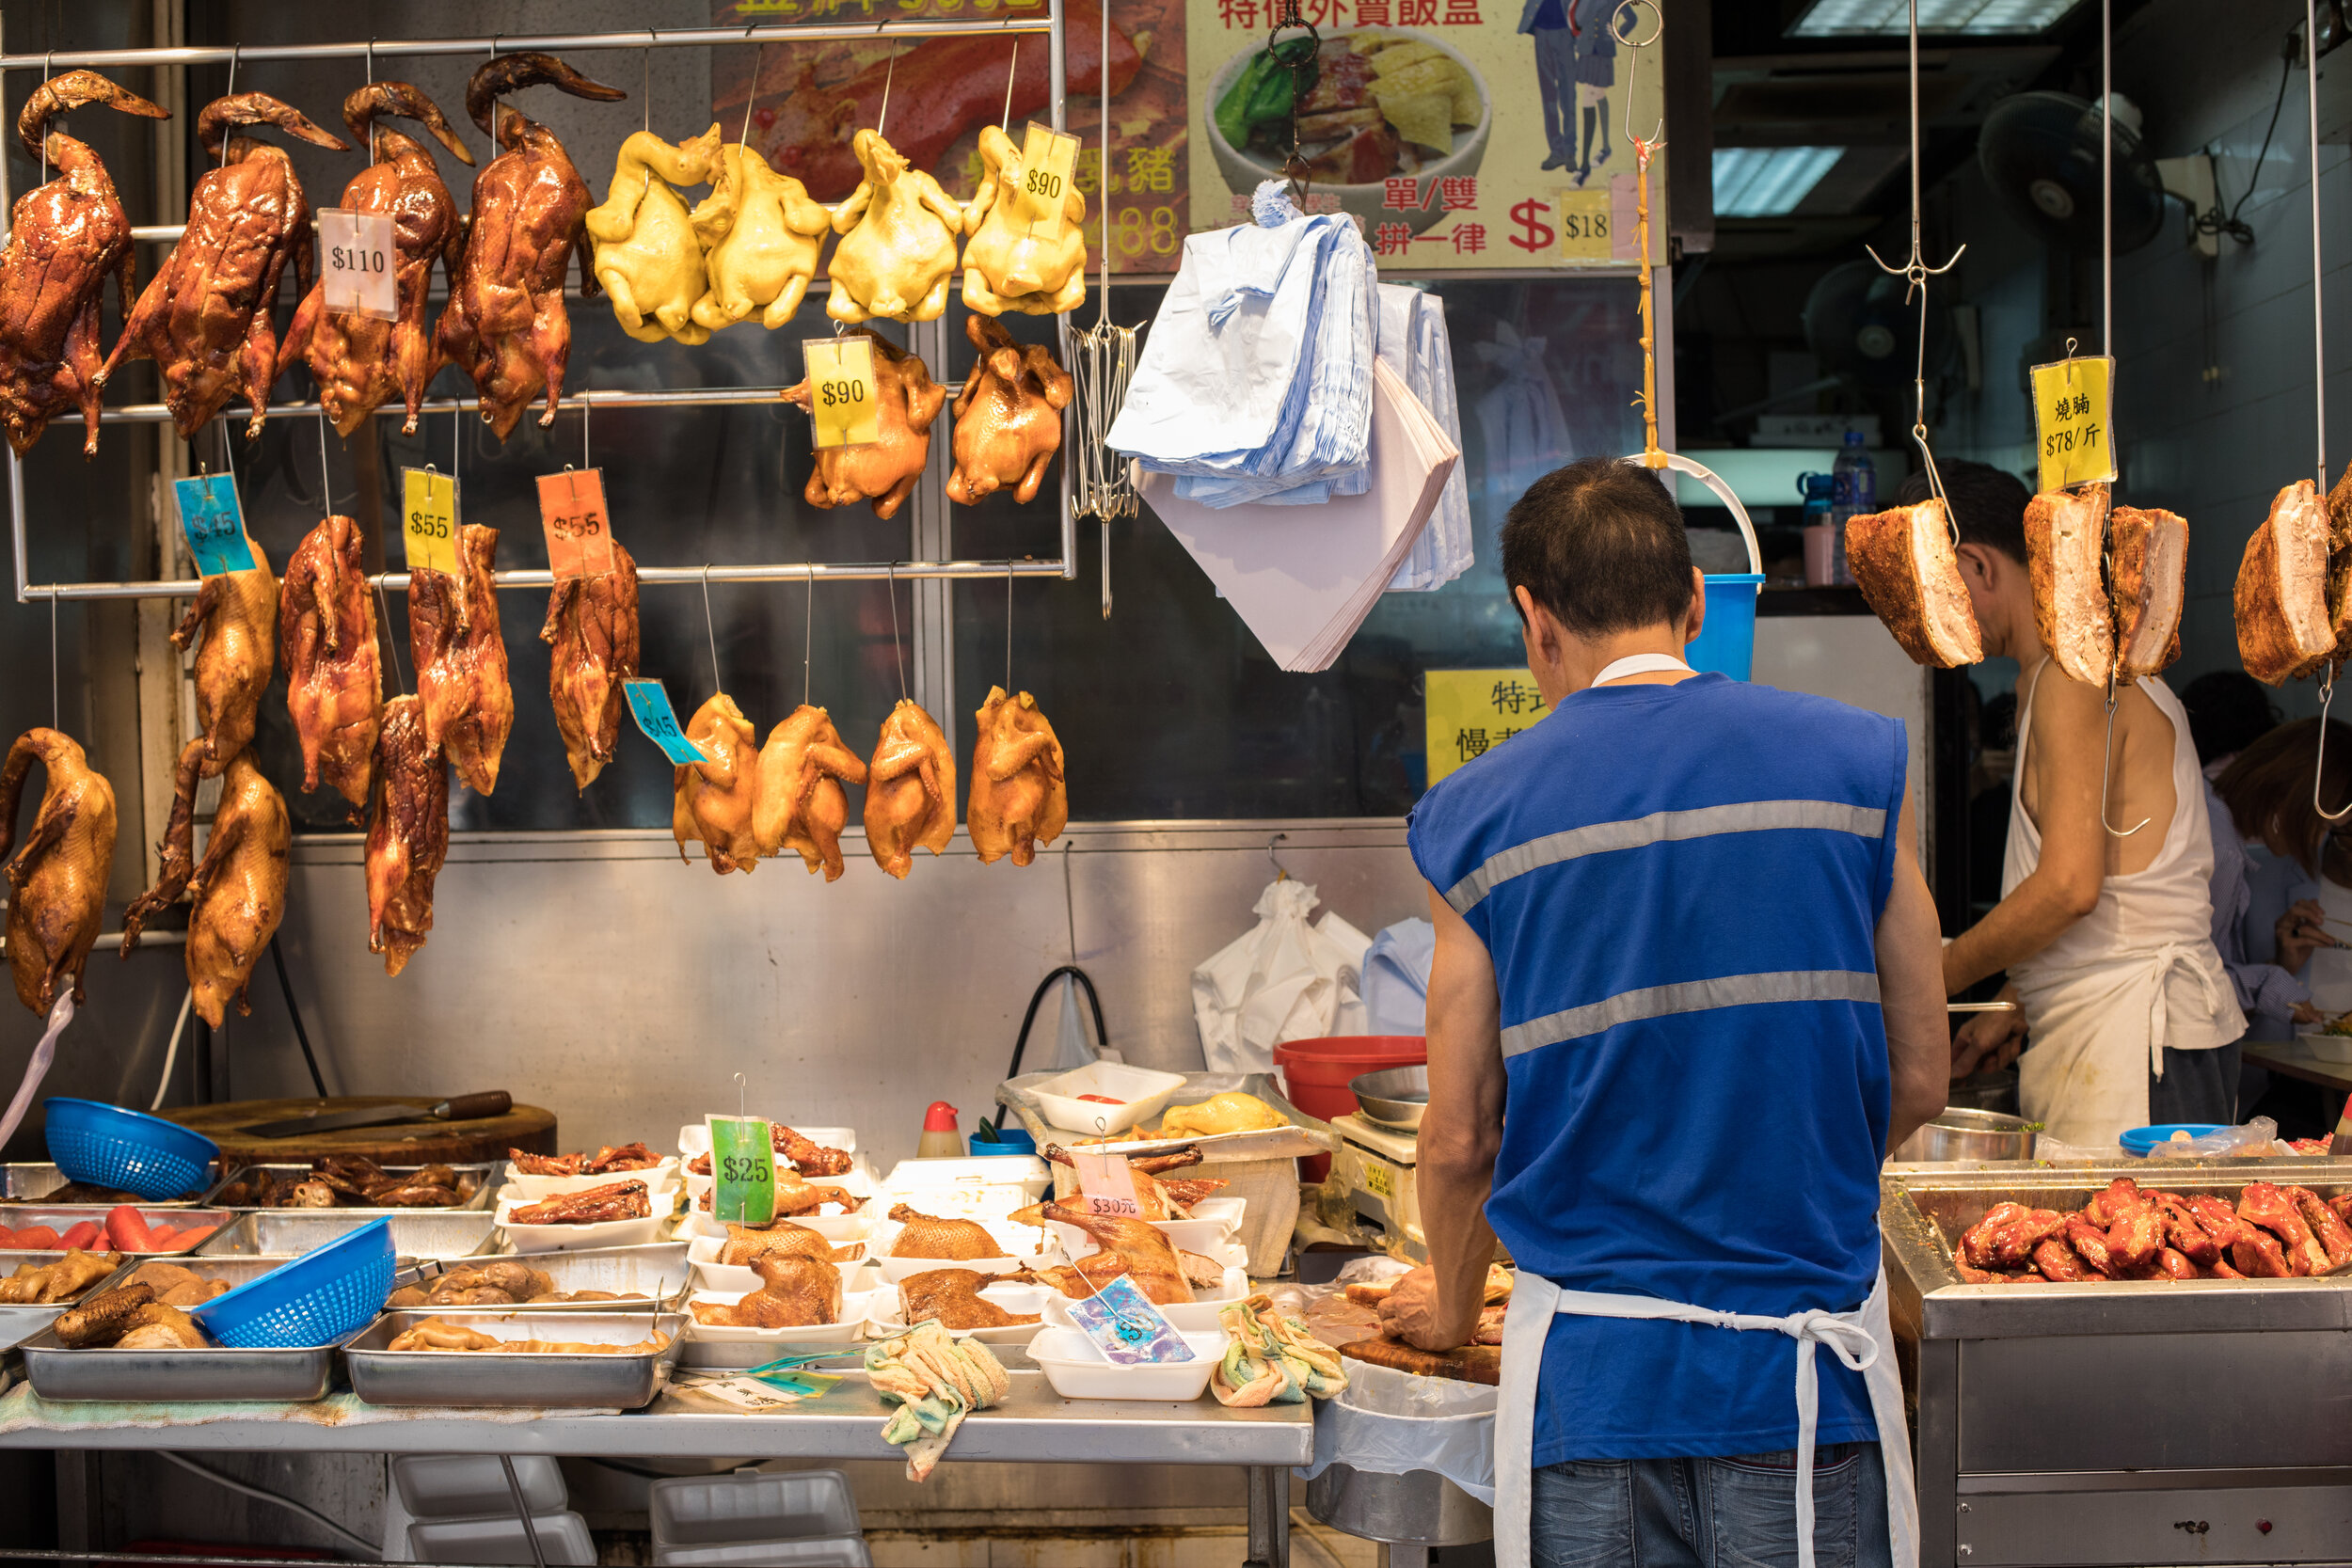 Food preparation and sale at a store in Hong Kong.